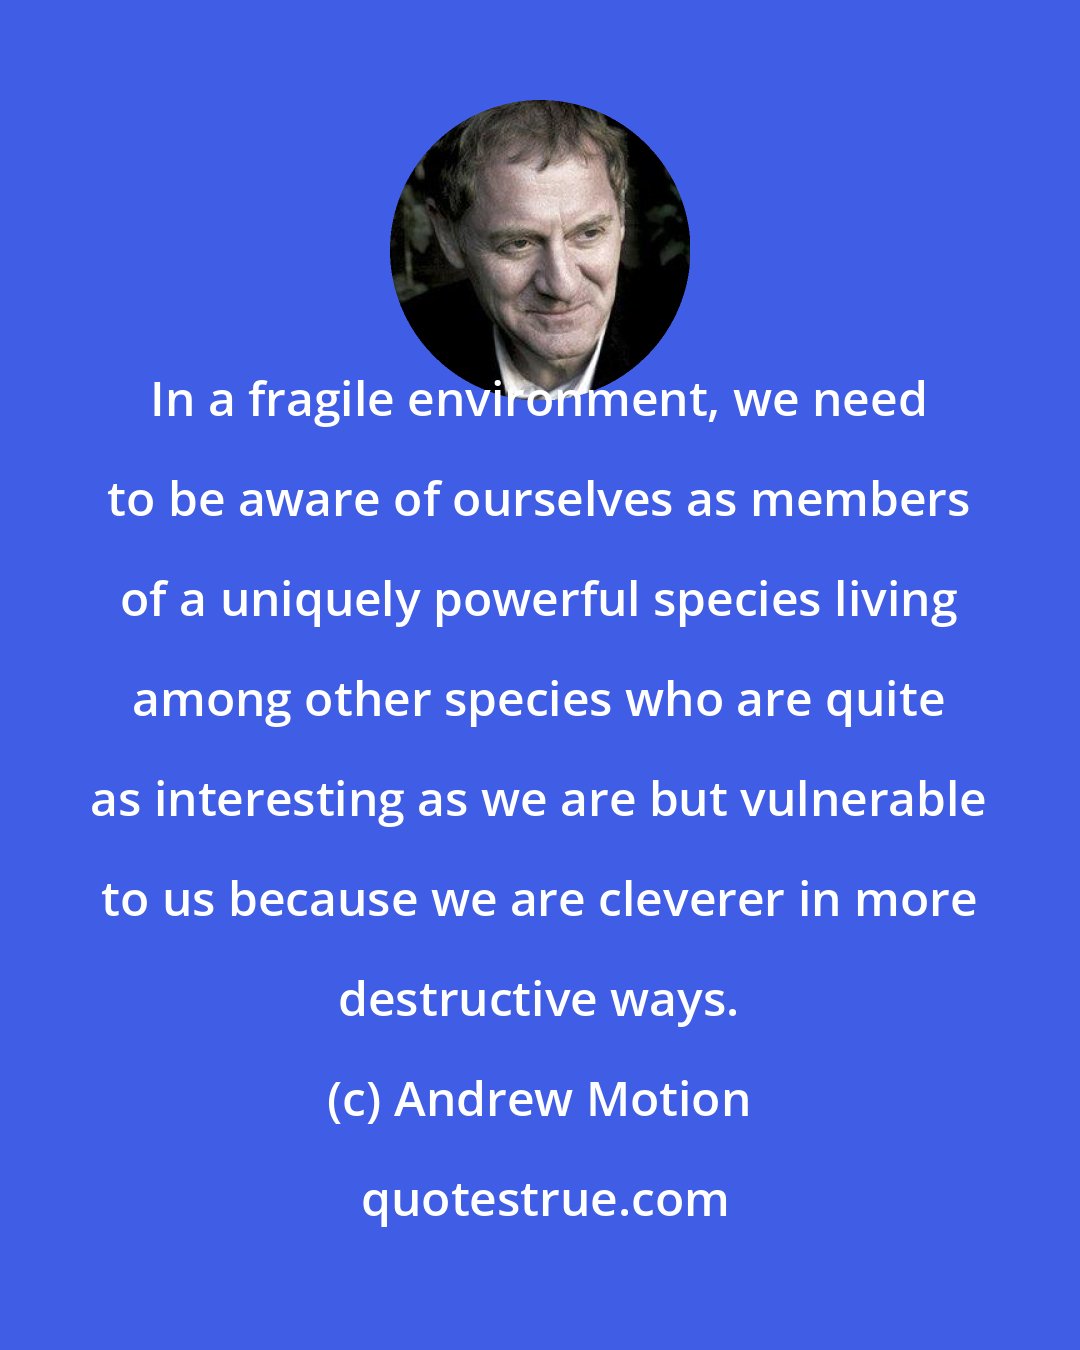 Andrew Motion: In a fragile environment, we need to be aware of ourselves as members of a uniquely powerful species living among other species who are quite as interesting as we are but vulnerable to us because we are cleverer in more destructive ways.